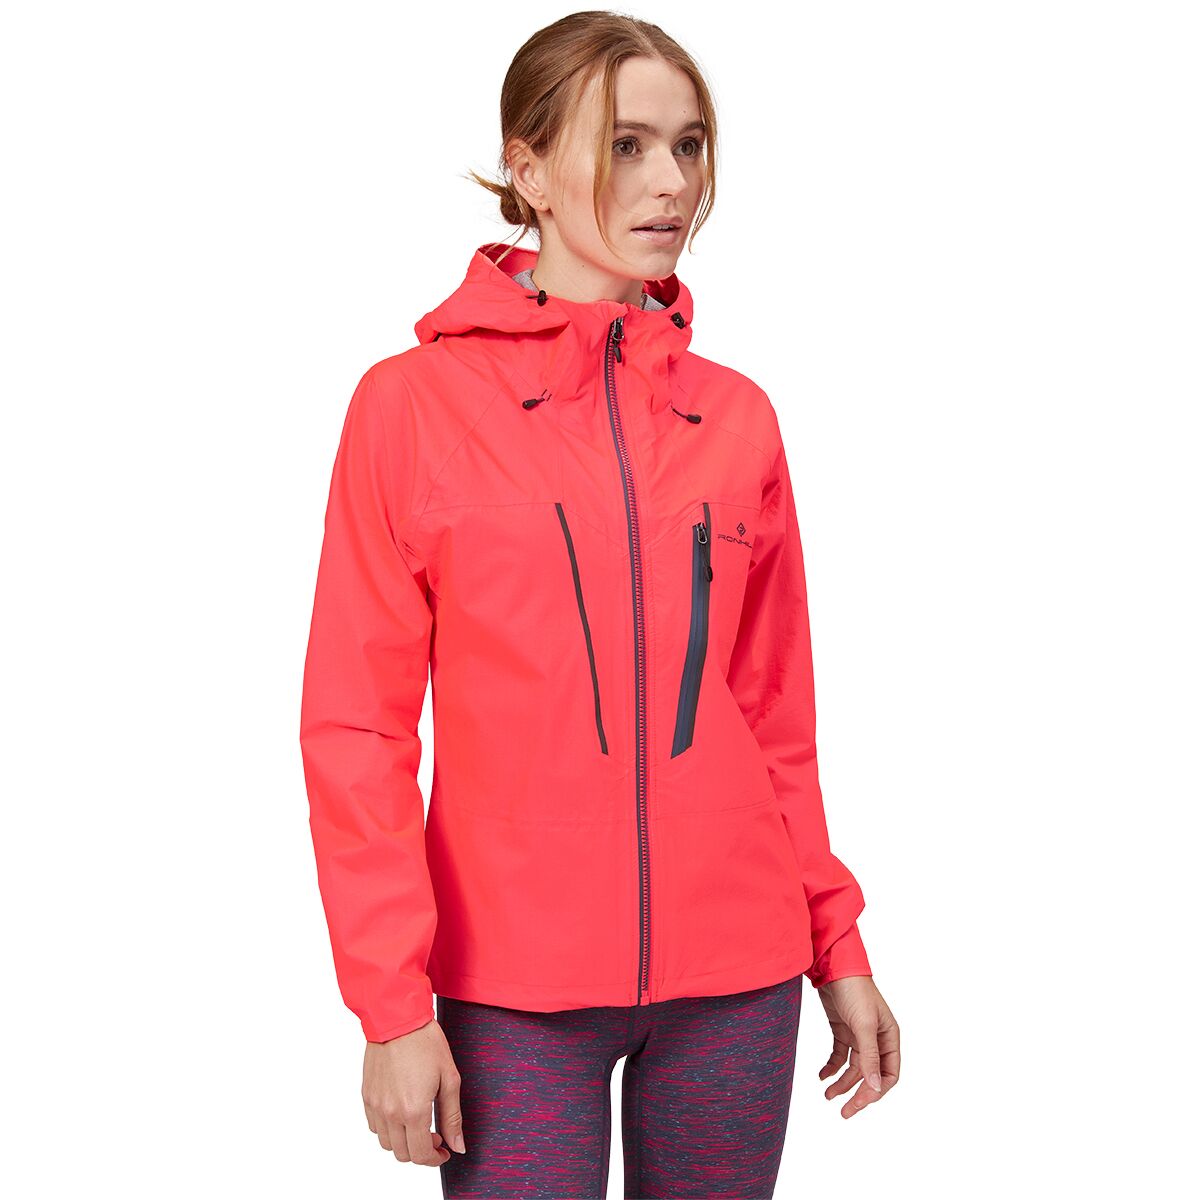 Ron Hill Tech Fortify Jacket - Women's Hot Pink/Charcoal 10